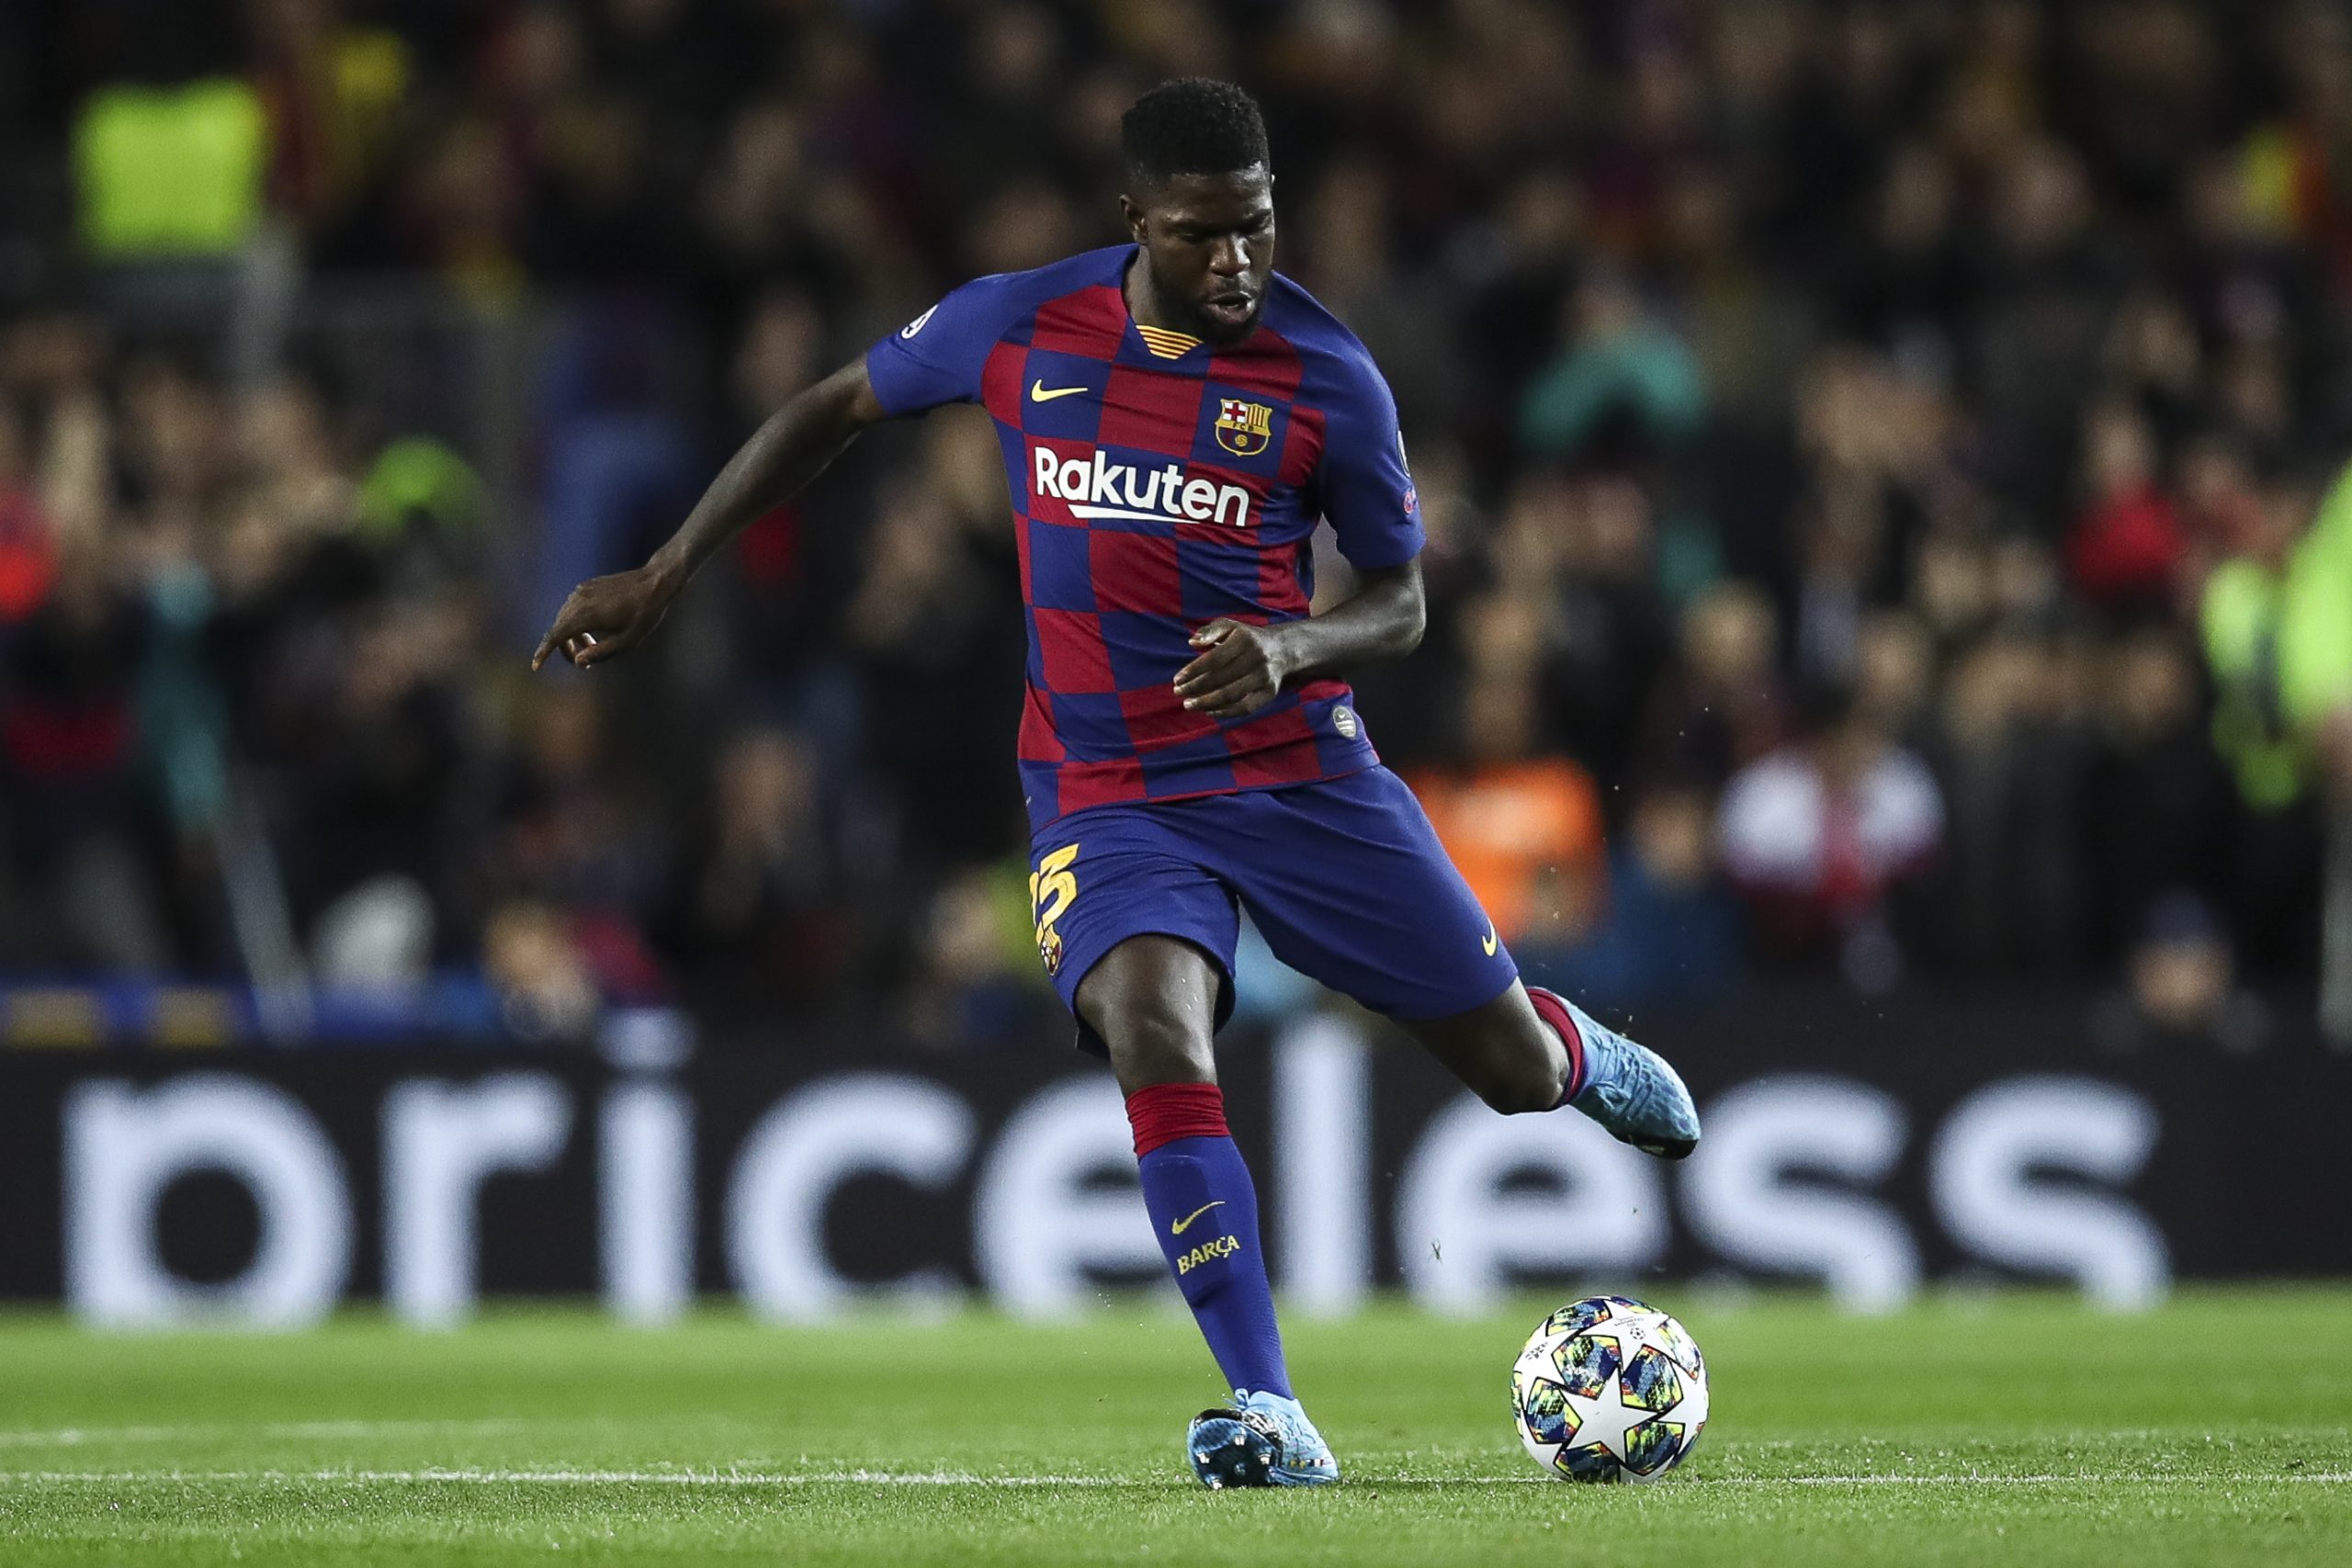 BARCELONA, SPAIN - NOVEMBER 27: Samuel Umtiti of Barcelona controls the ball during the UEFA Champions League group F match between FC Barcelona and Borussia Dortmund at Camp Nou on November 27, 2019 in Barcelona, Spain. (Photo by Maja Hitij/Bongarts/Getty Images)